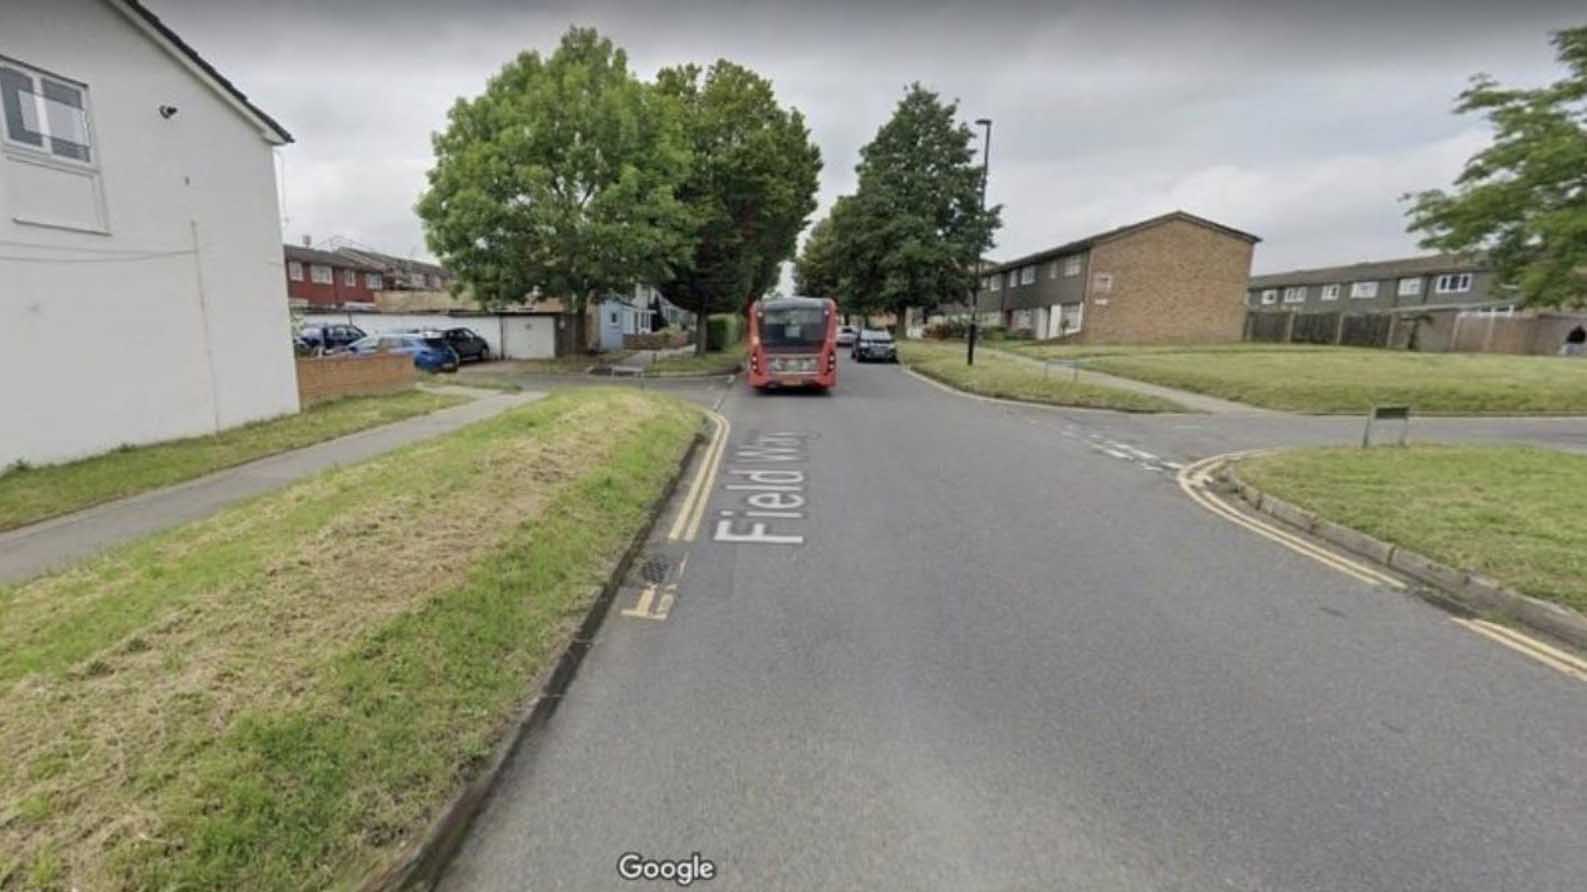 Petition: Zebra crossing on the corner of Brierley and Fieldway